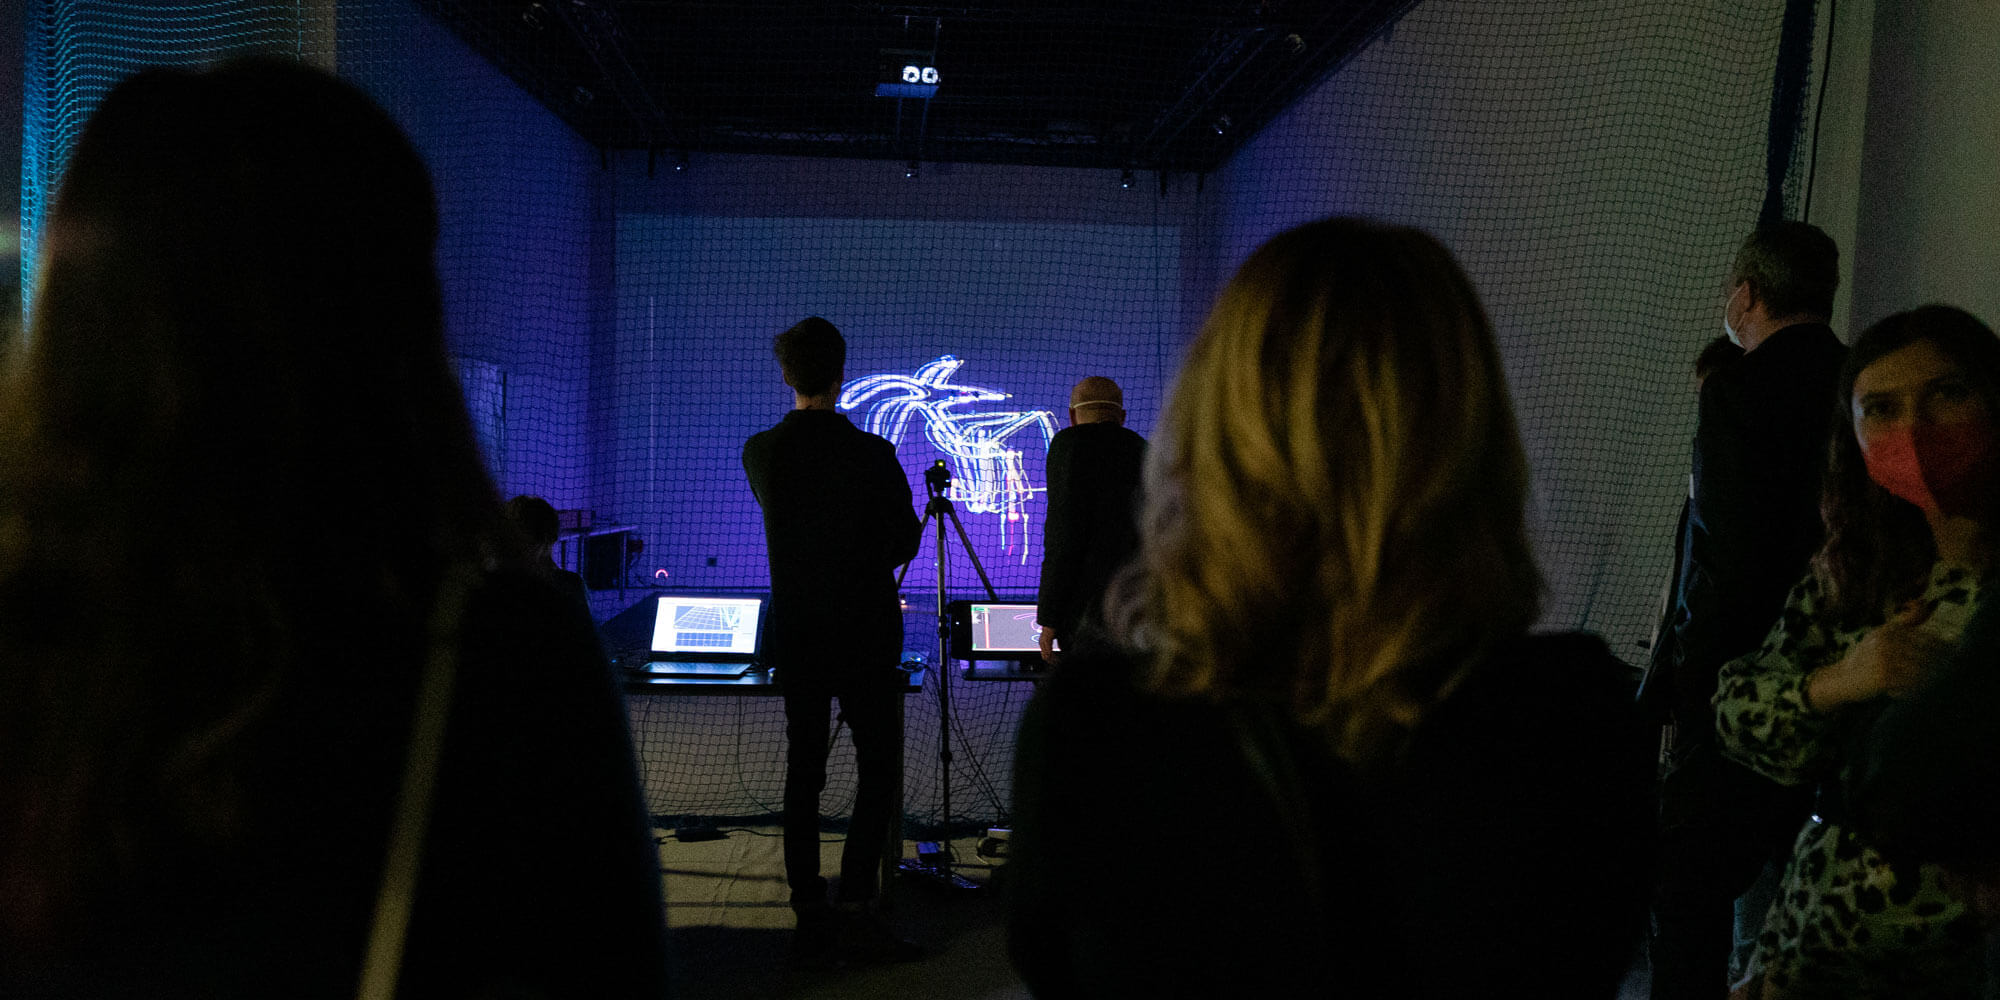 Drones merging to a digital canvas or painting with light: A workshop conducted by the Ars Electronica Futurelab as part of the Gigabit Academy demonstrated the art of swarm robotics.